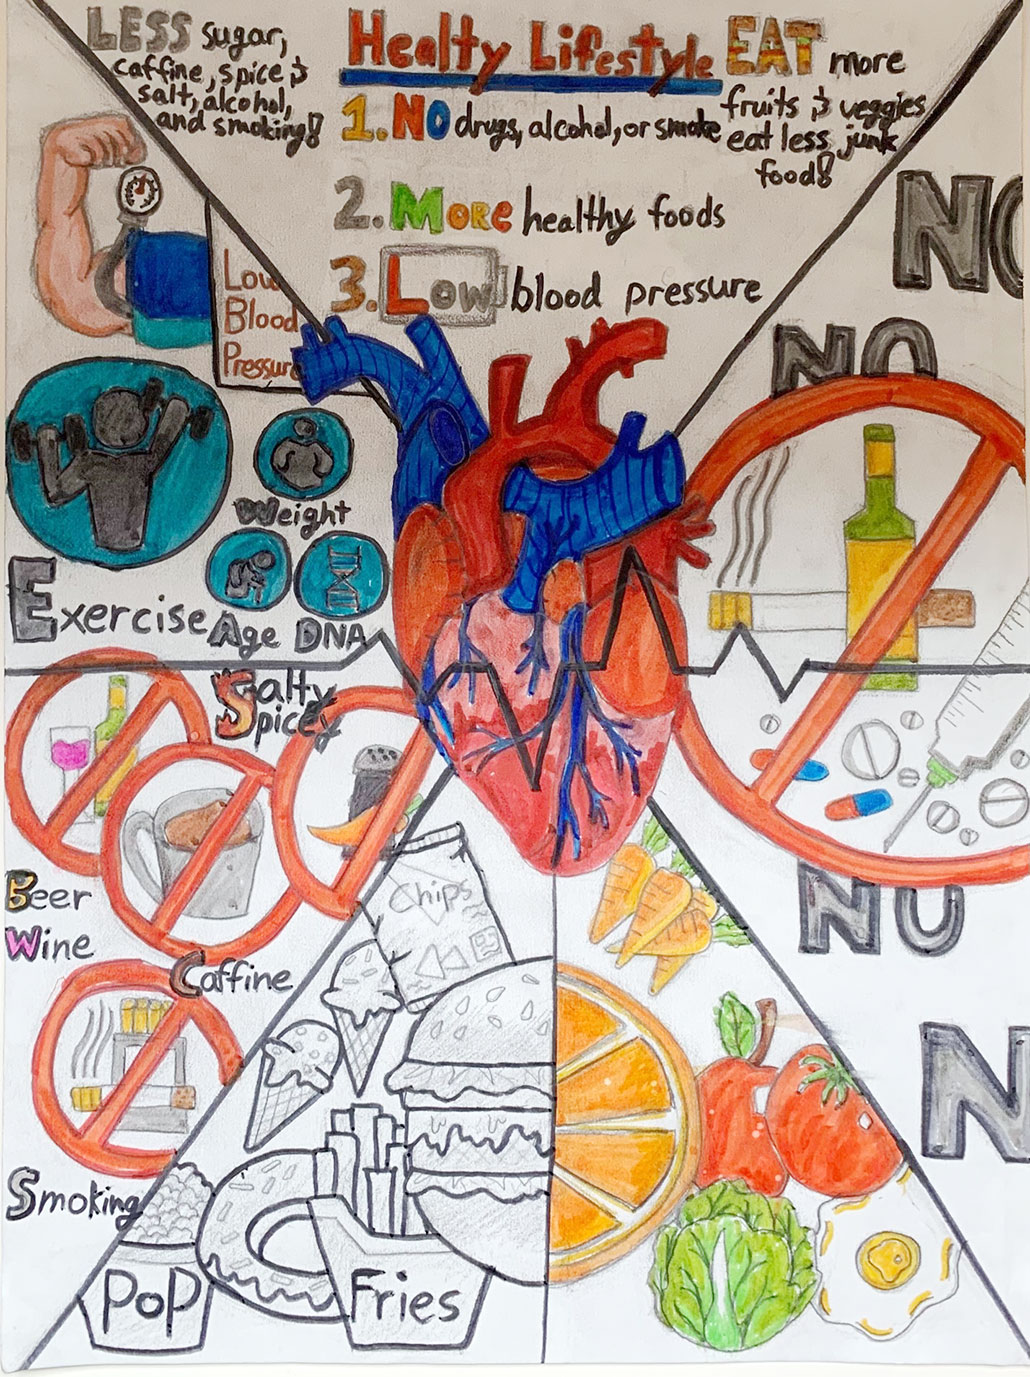 a poster with a hand-drawn anatomically correct heart in the middle, surrounded by other illustrations, such as fruits and vegetables, as well as caffeine, cigarettes and alcoholic beverages all with X's drawn through them